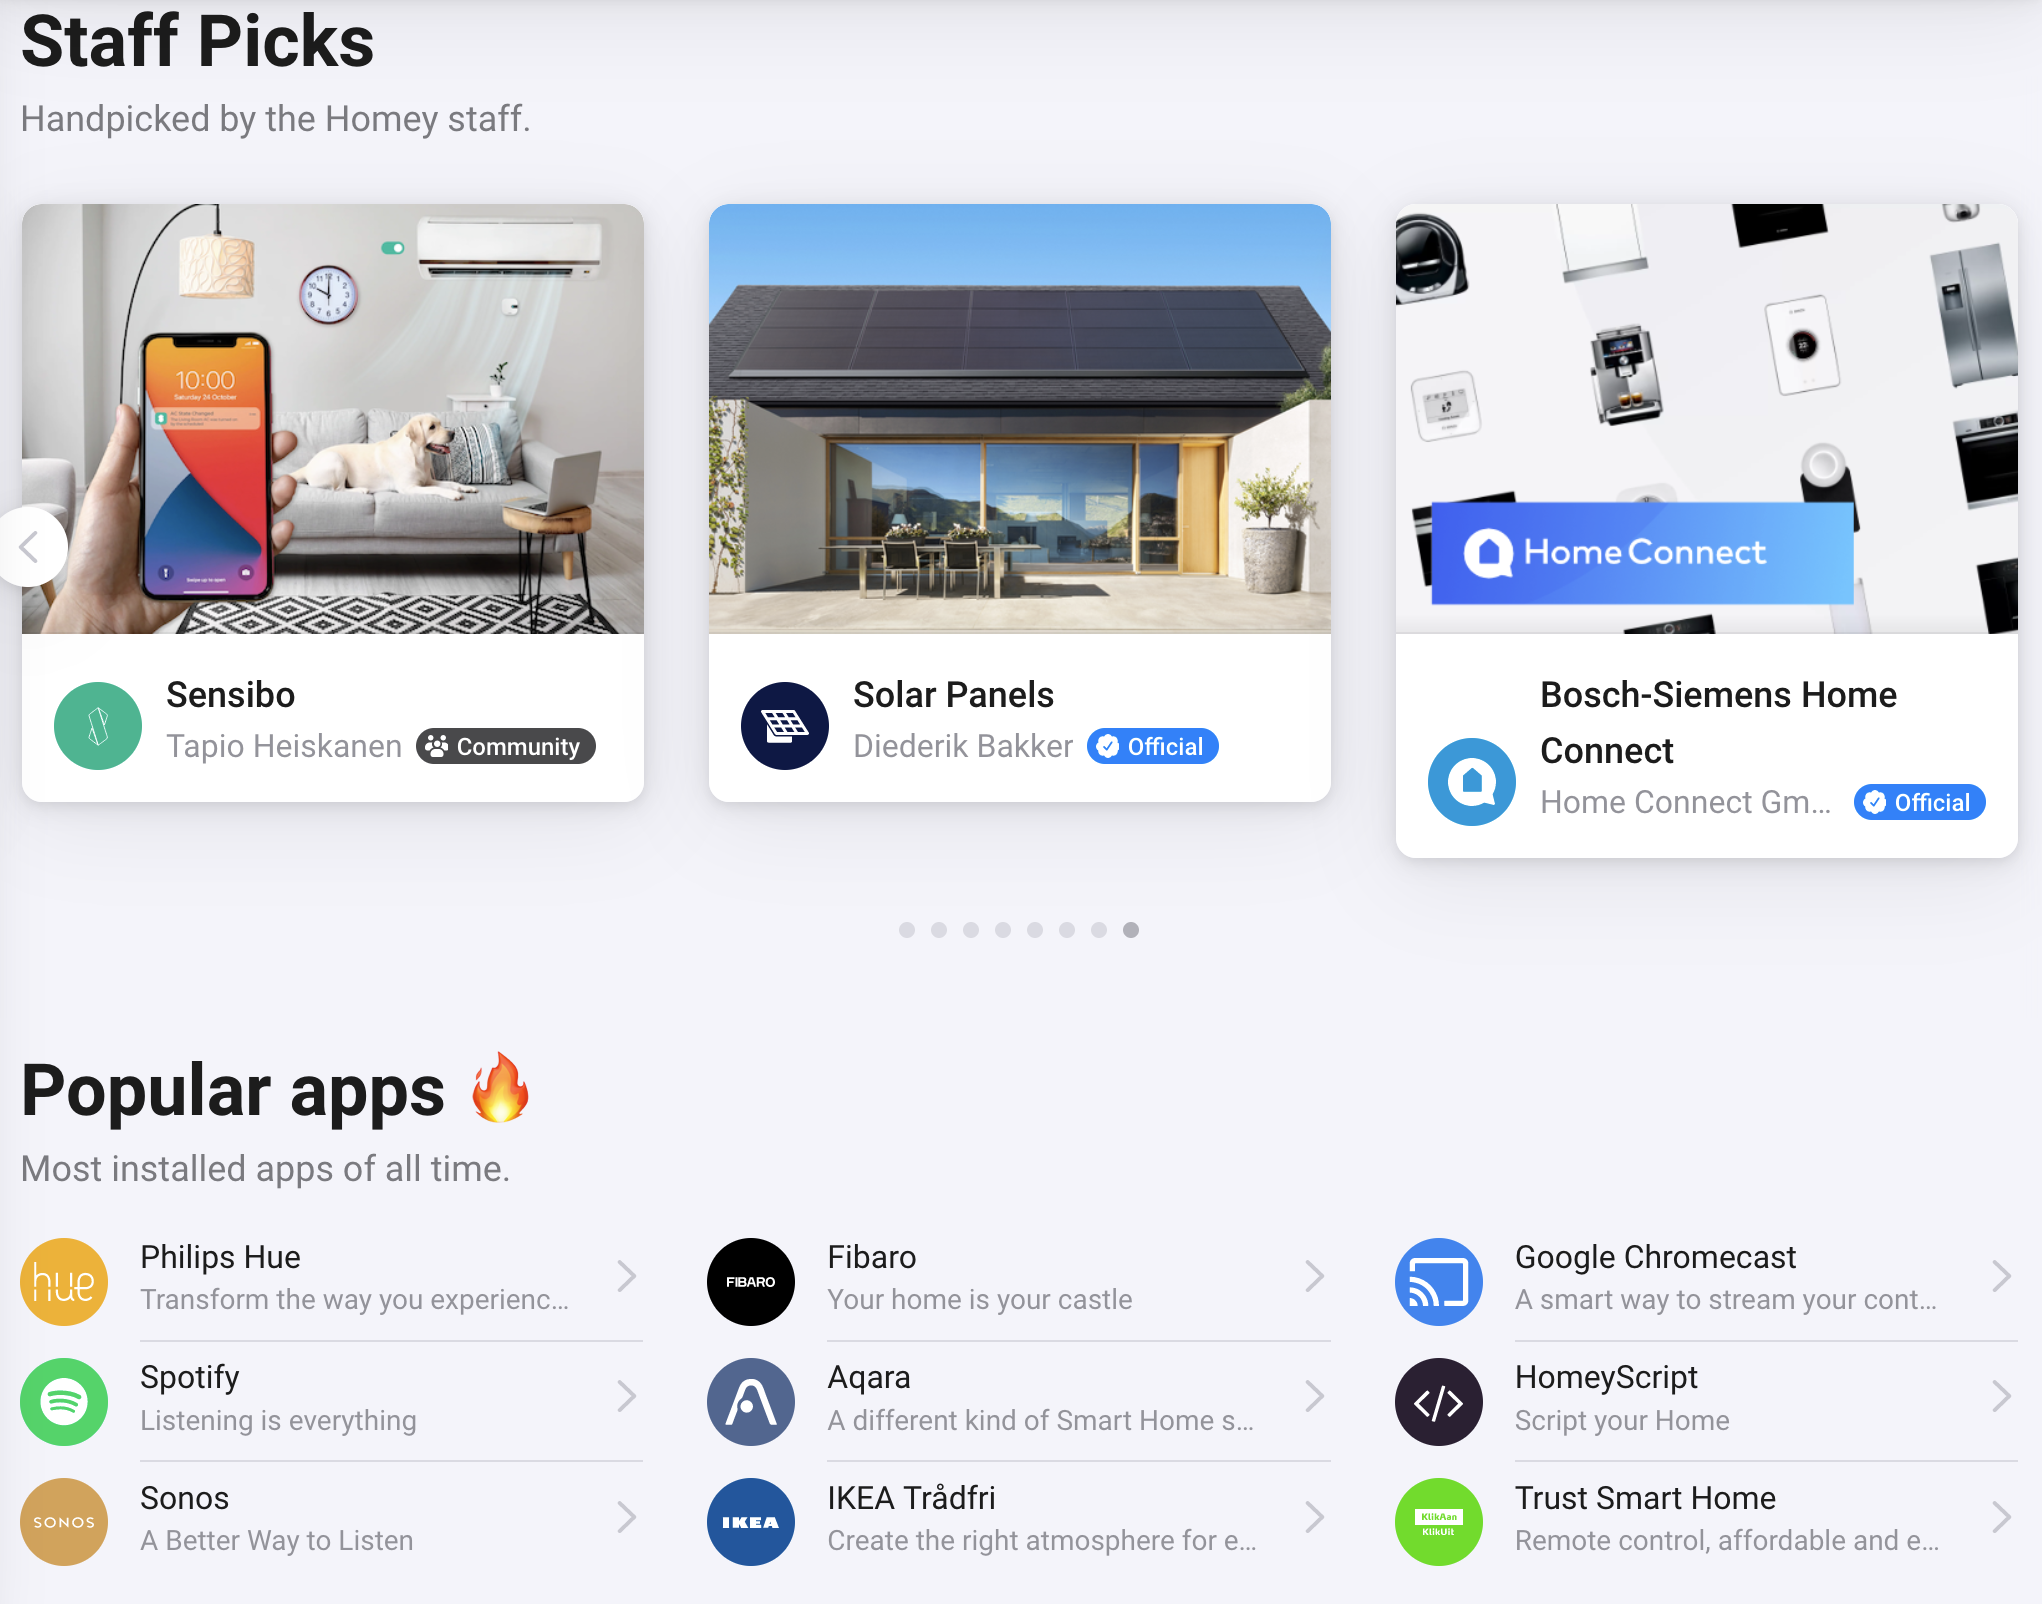 Bosch Smart Home on the App Store